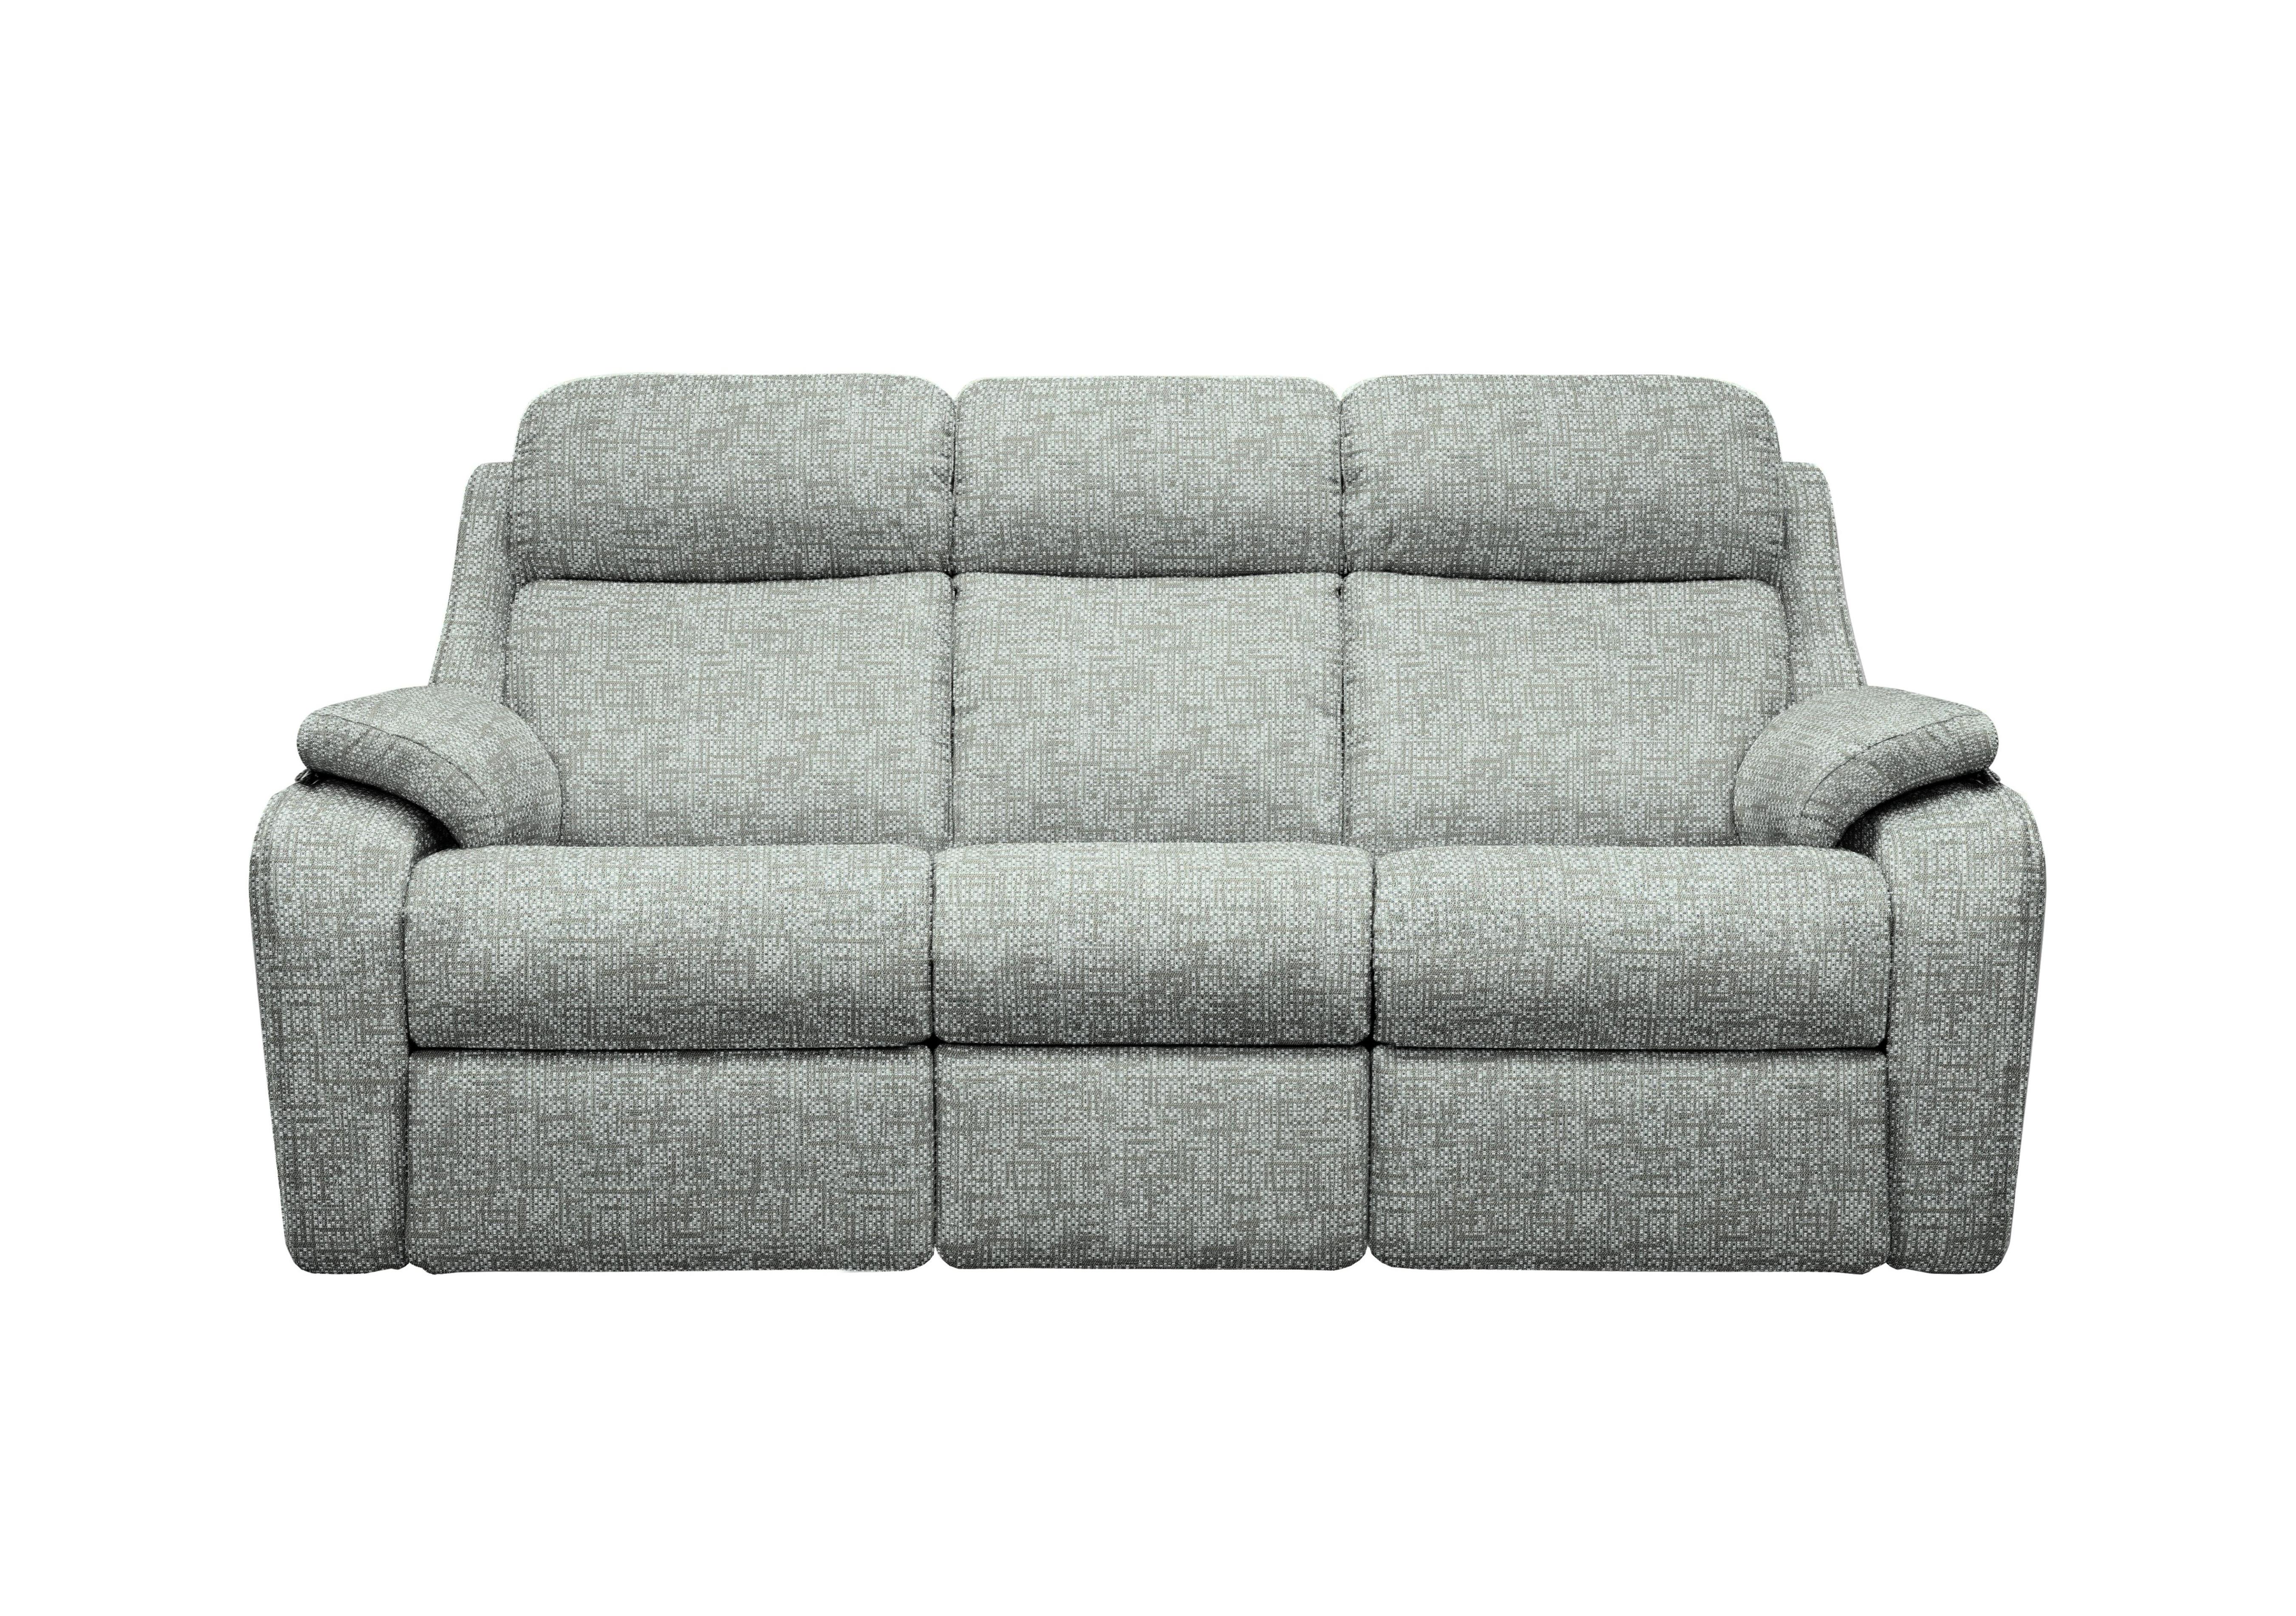 Kingsbury 3 Seater Fabric Power Recliner Sofa with Power Headrests in B032 Remco Duck Egg on Furniture Village